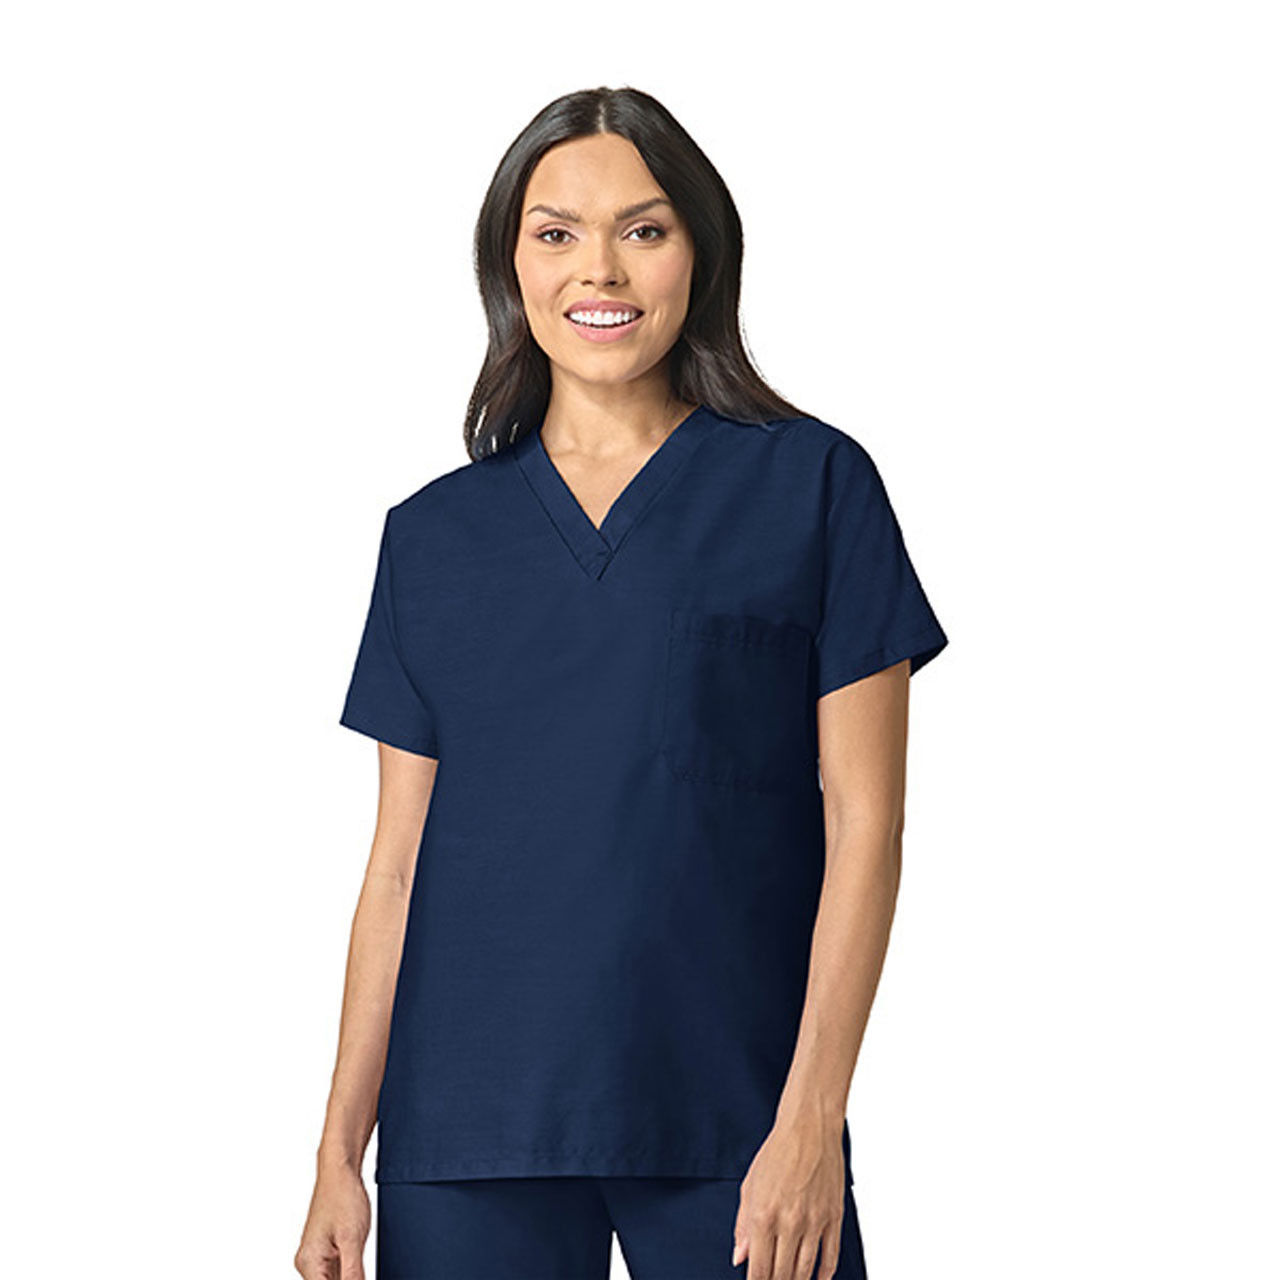 How many V Neck Scrub Tops are in a pack?